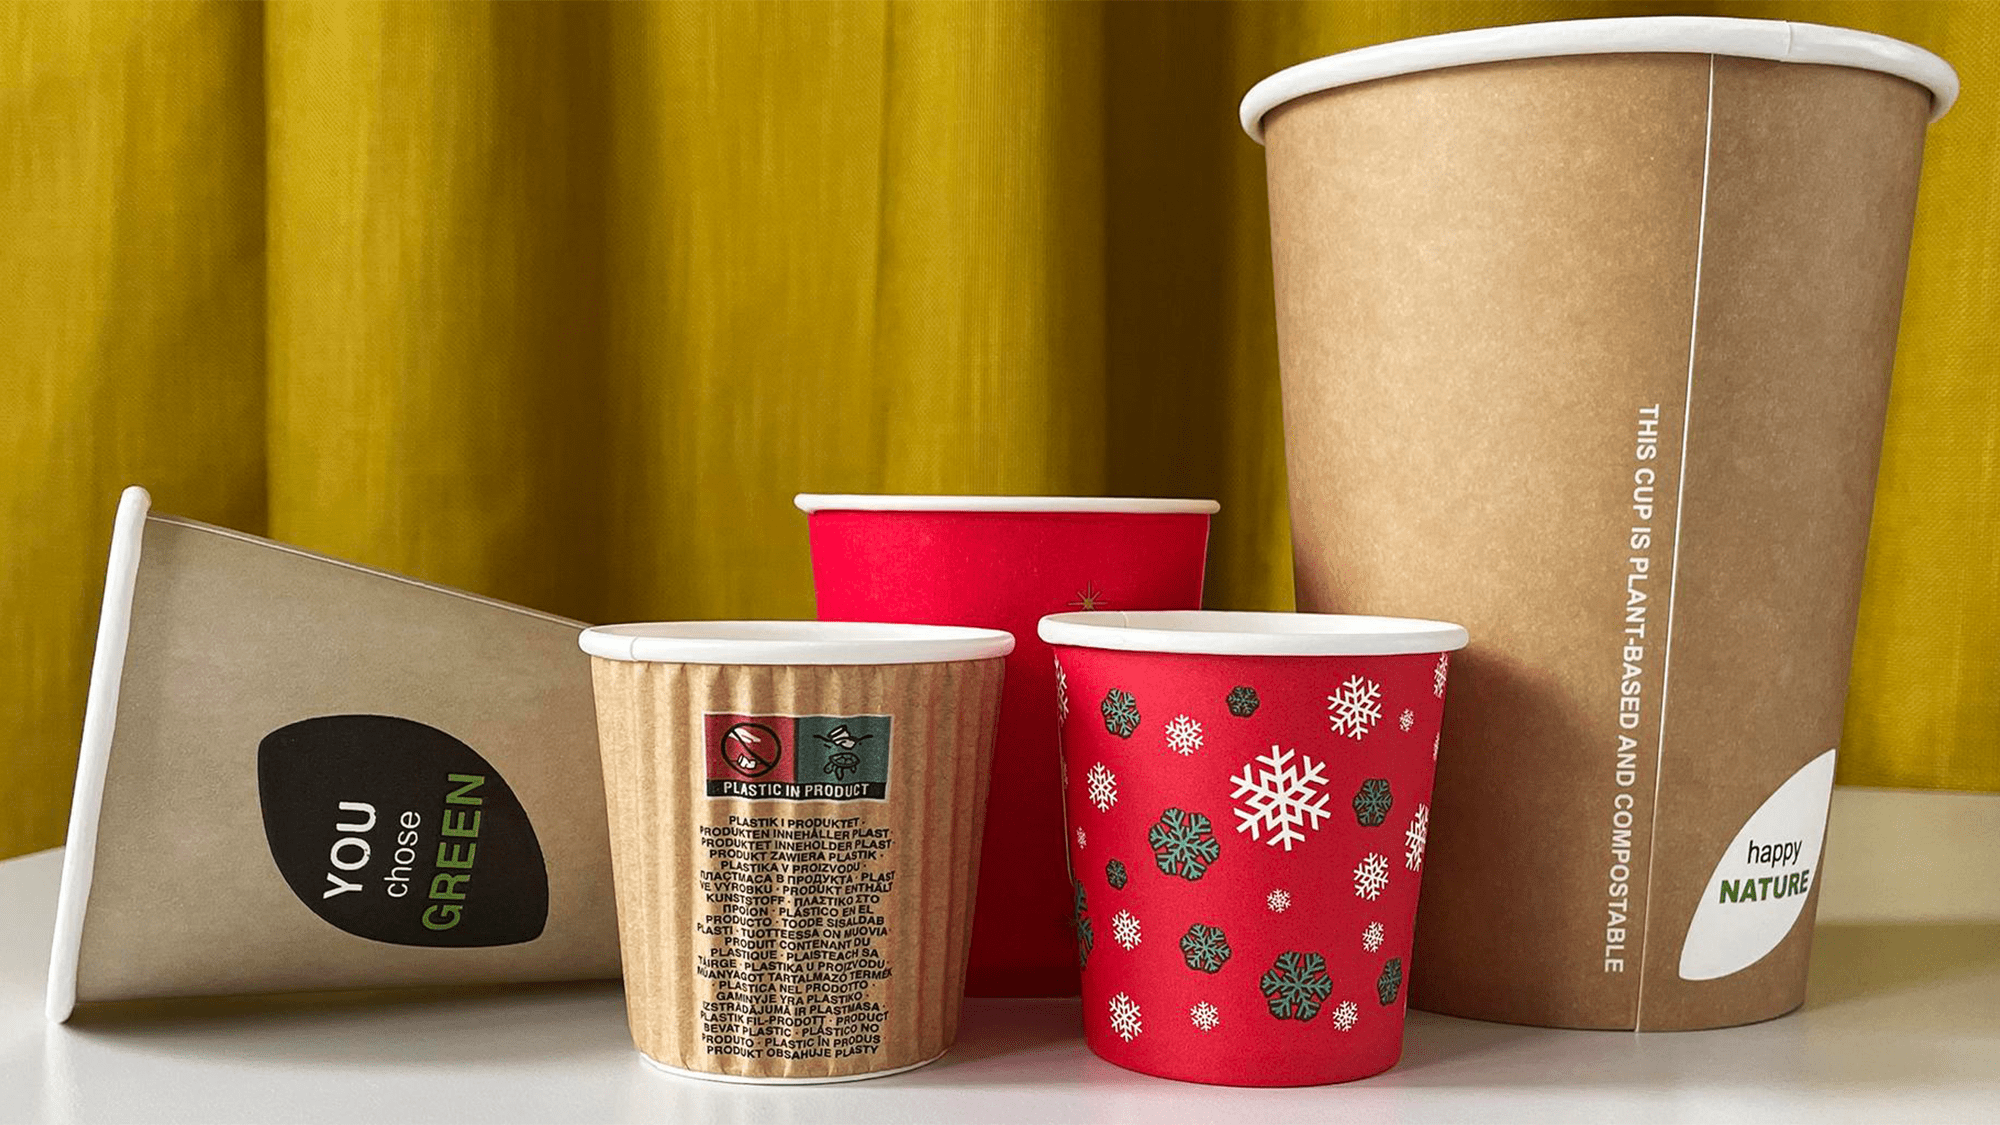 Paper cups still use plastic—and it’s a problem for the planet